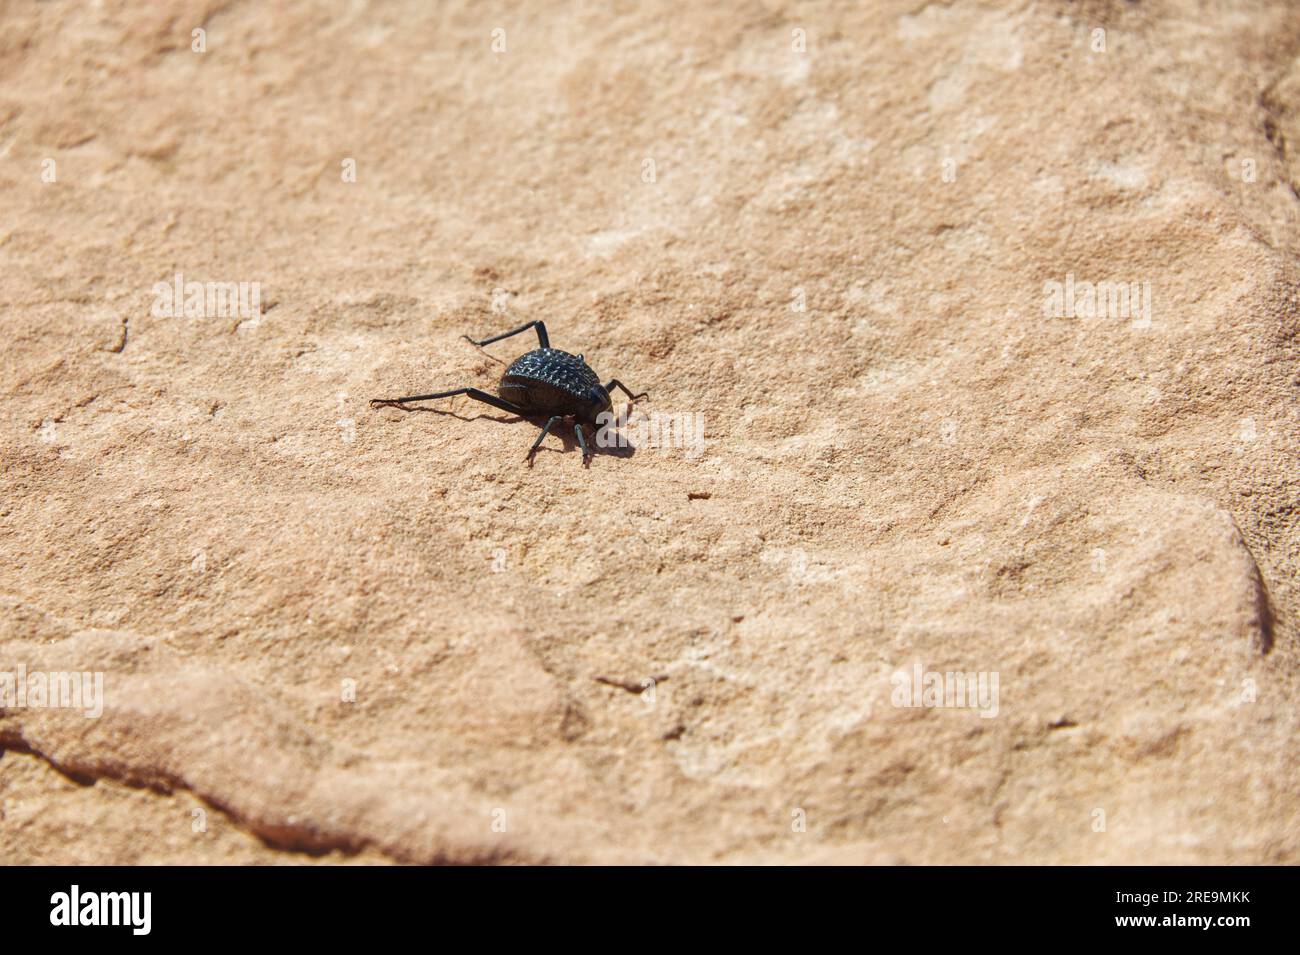 Close up view of a black Onymacris unguicularis beetle in the desert Stock Photo